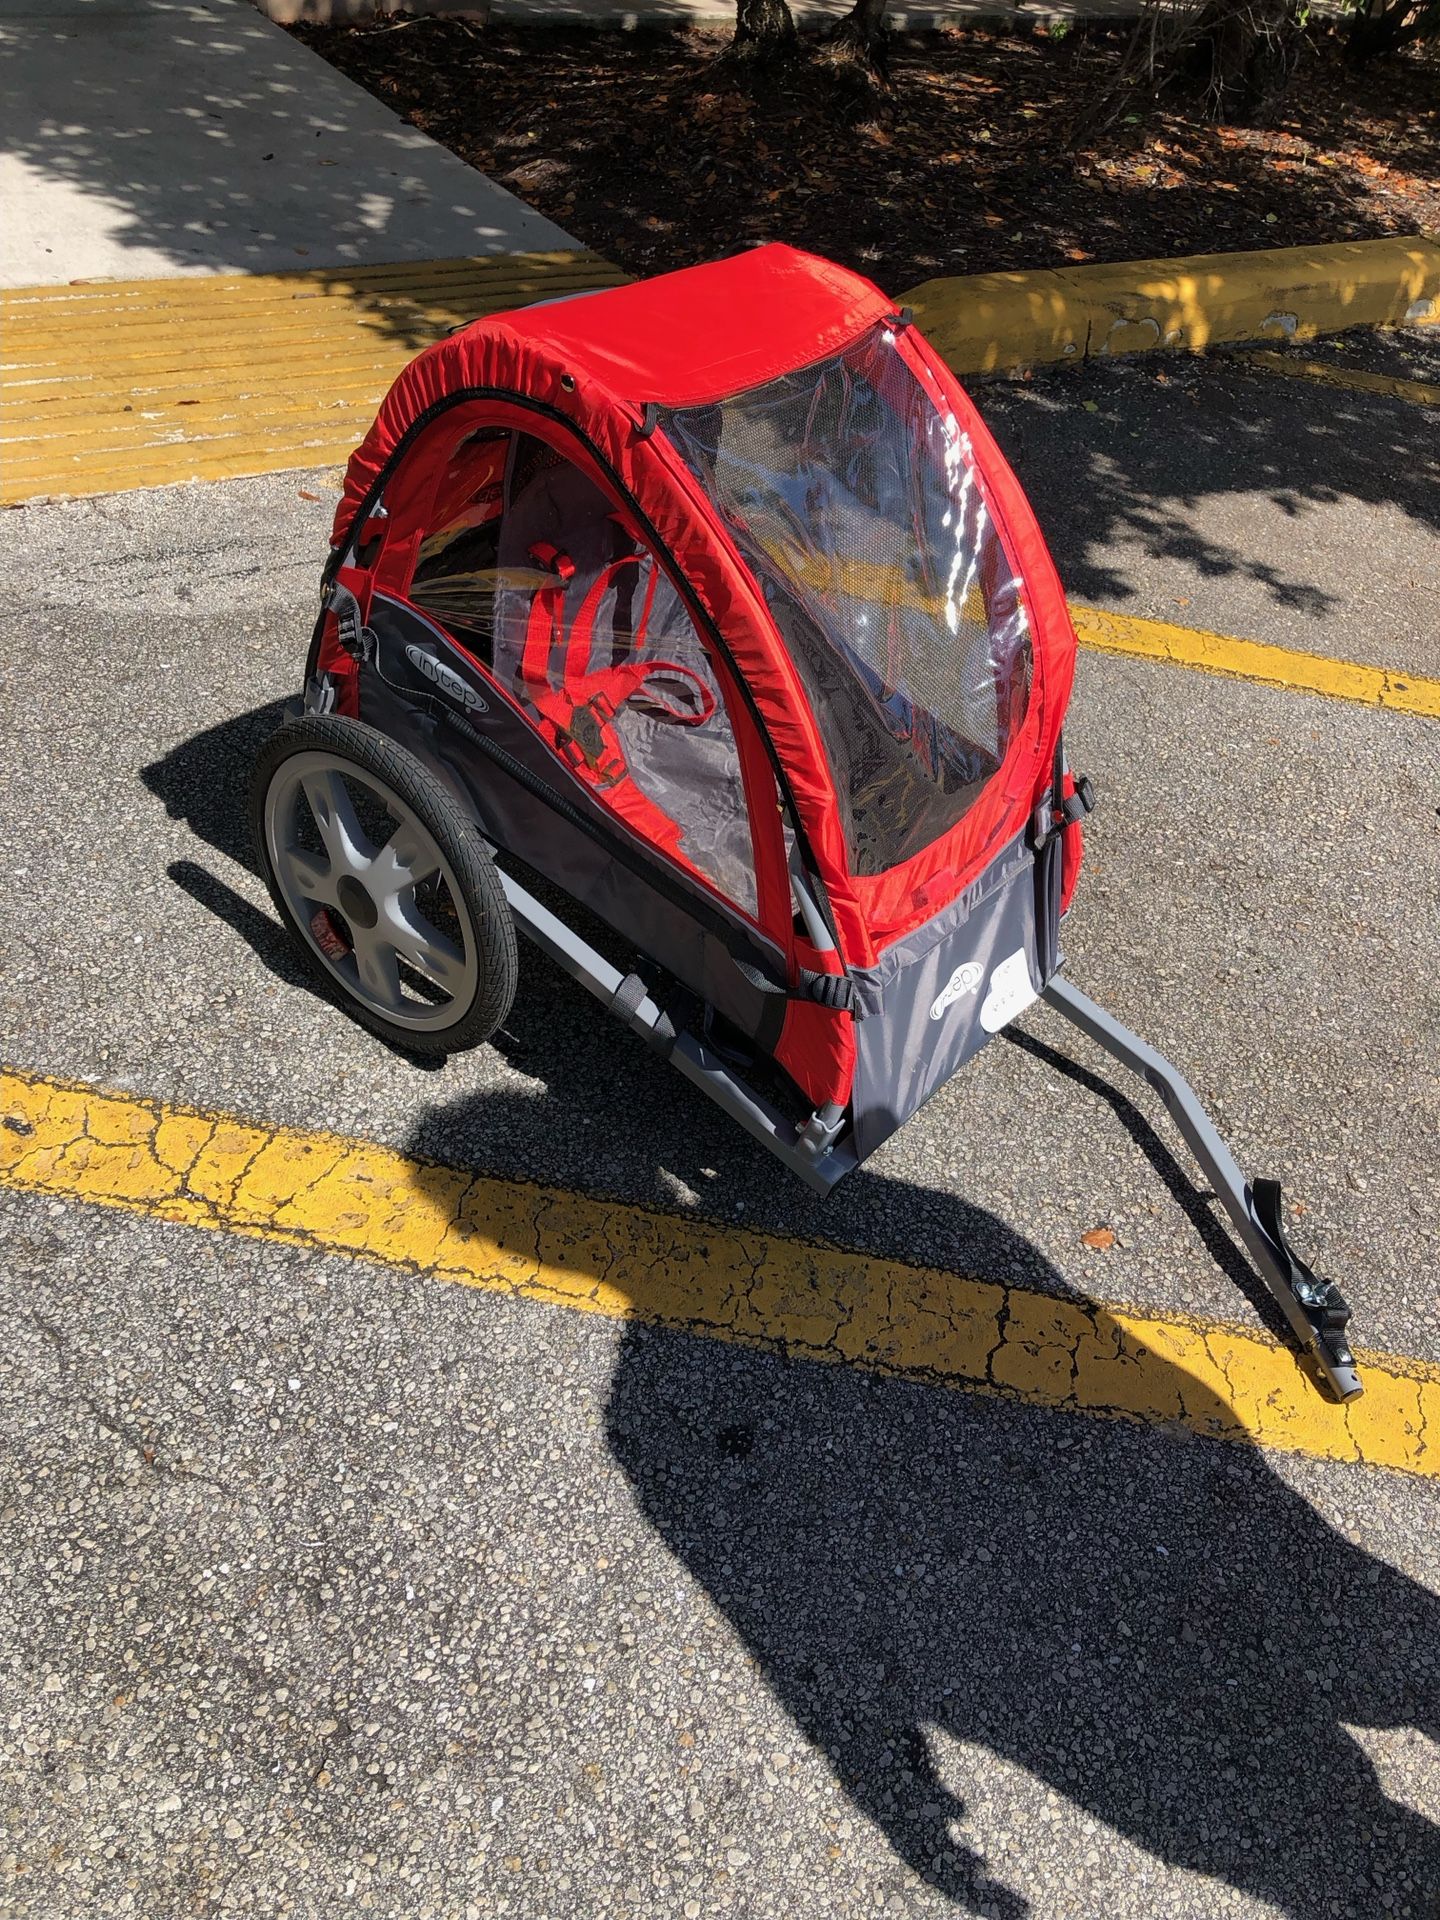 Bike Trailer for Toddlers, Kids, Single and Double Seat, 2-in-1 Canopy